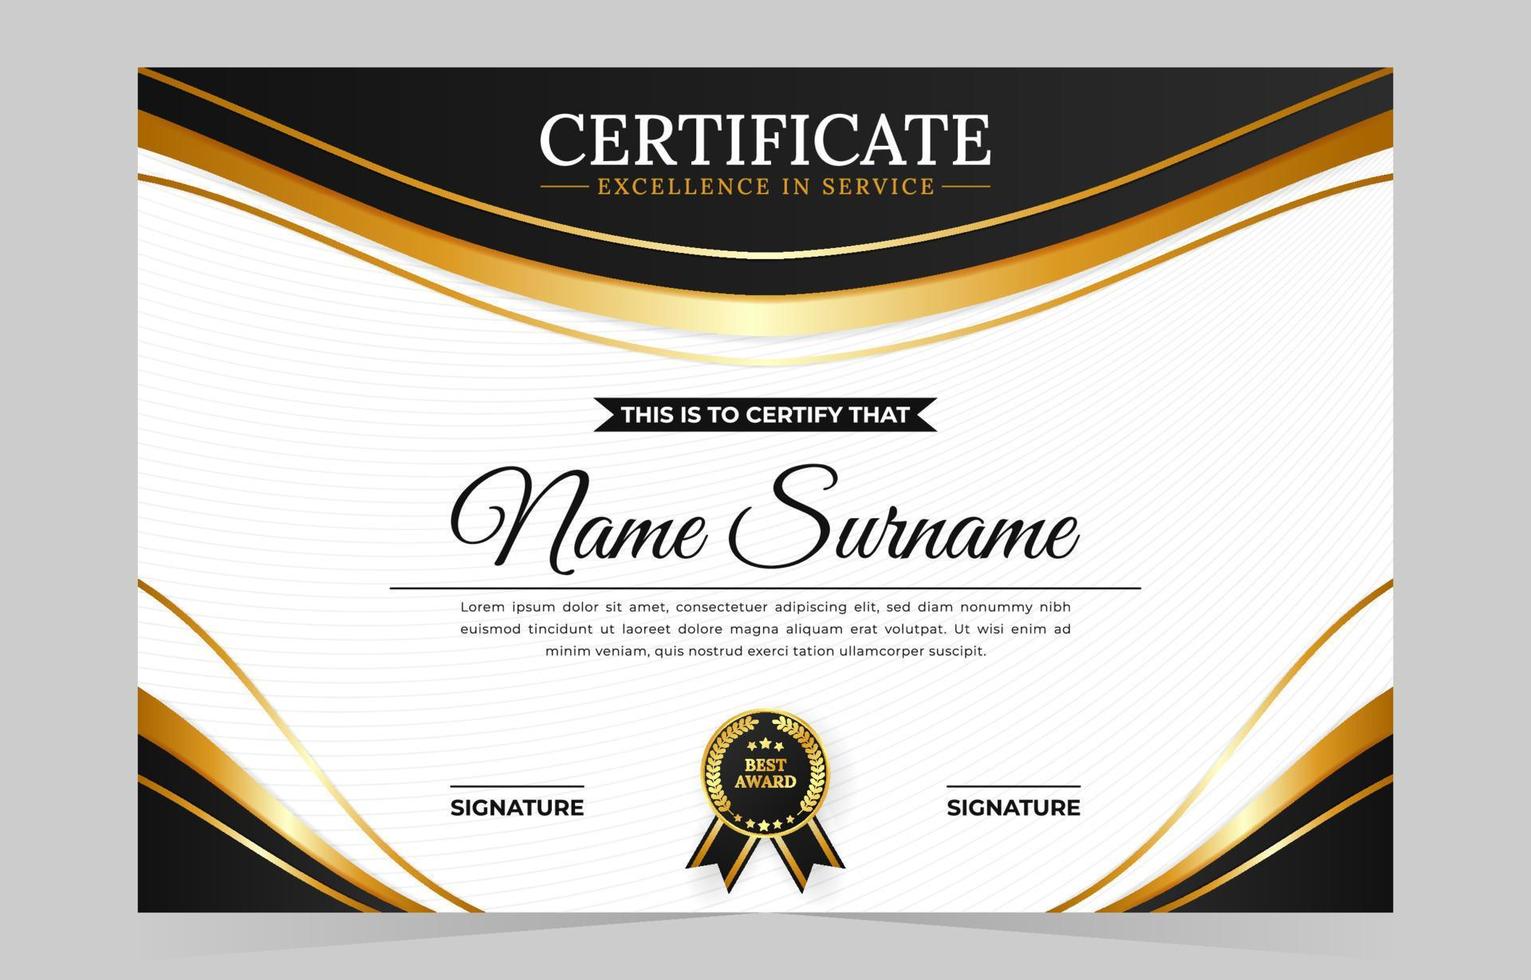 Promotion Certificate Template vector